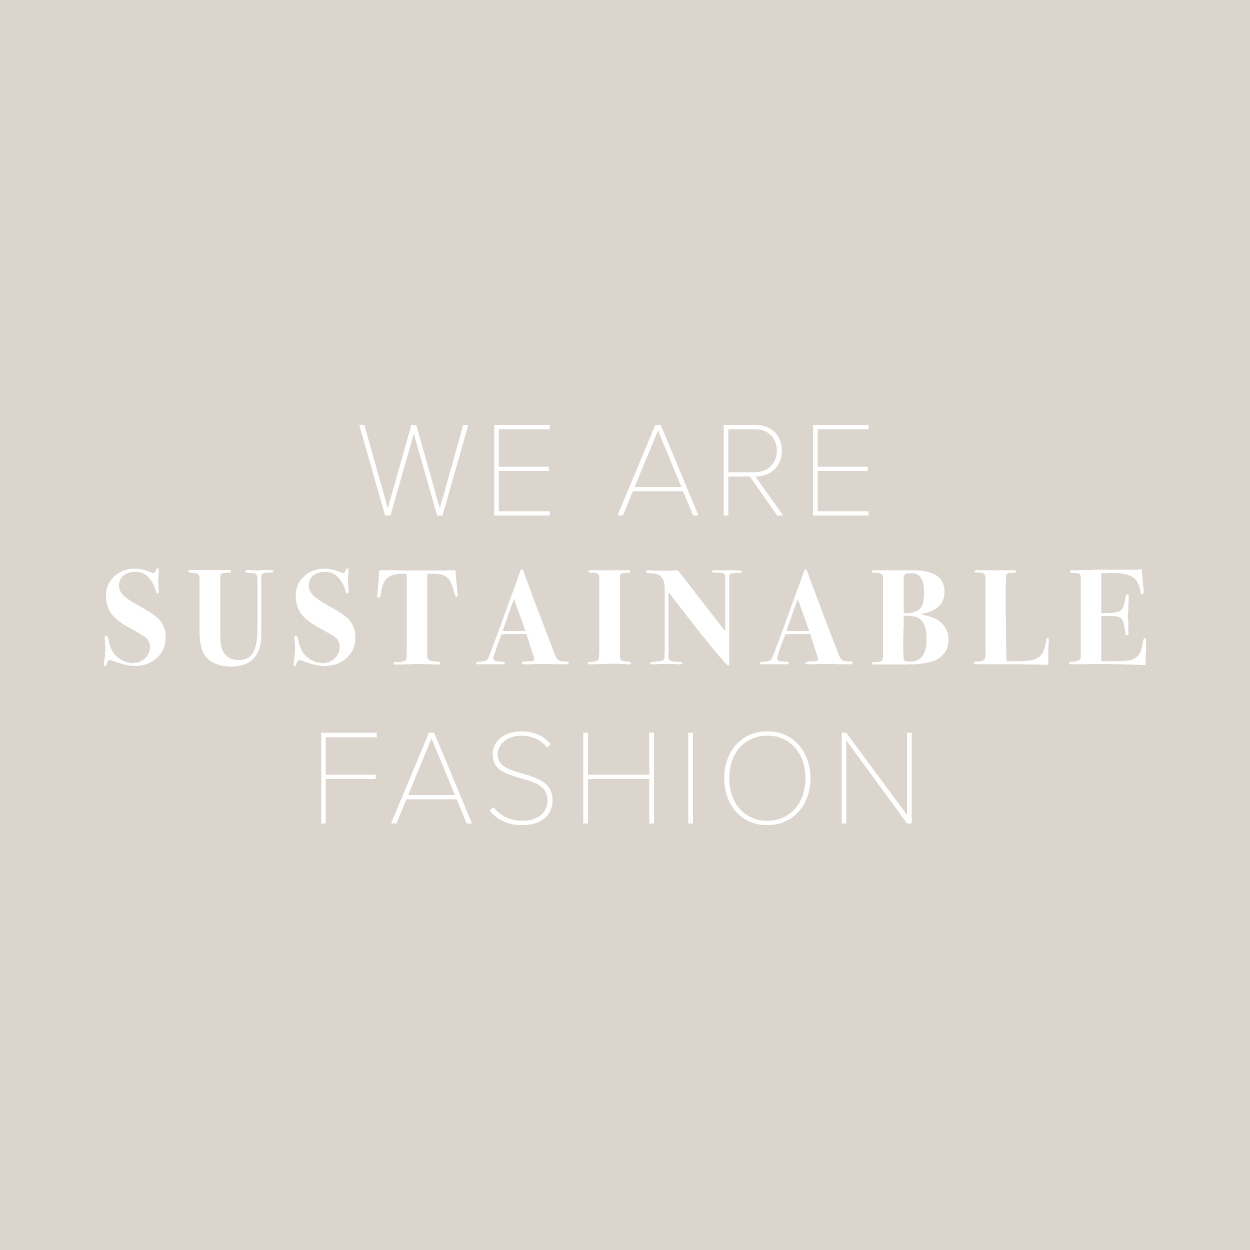 We Are Sustainable Fashion